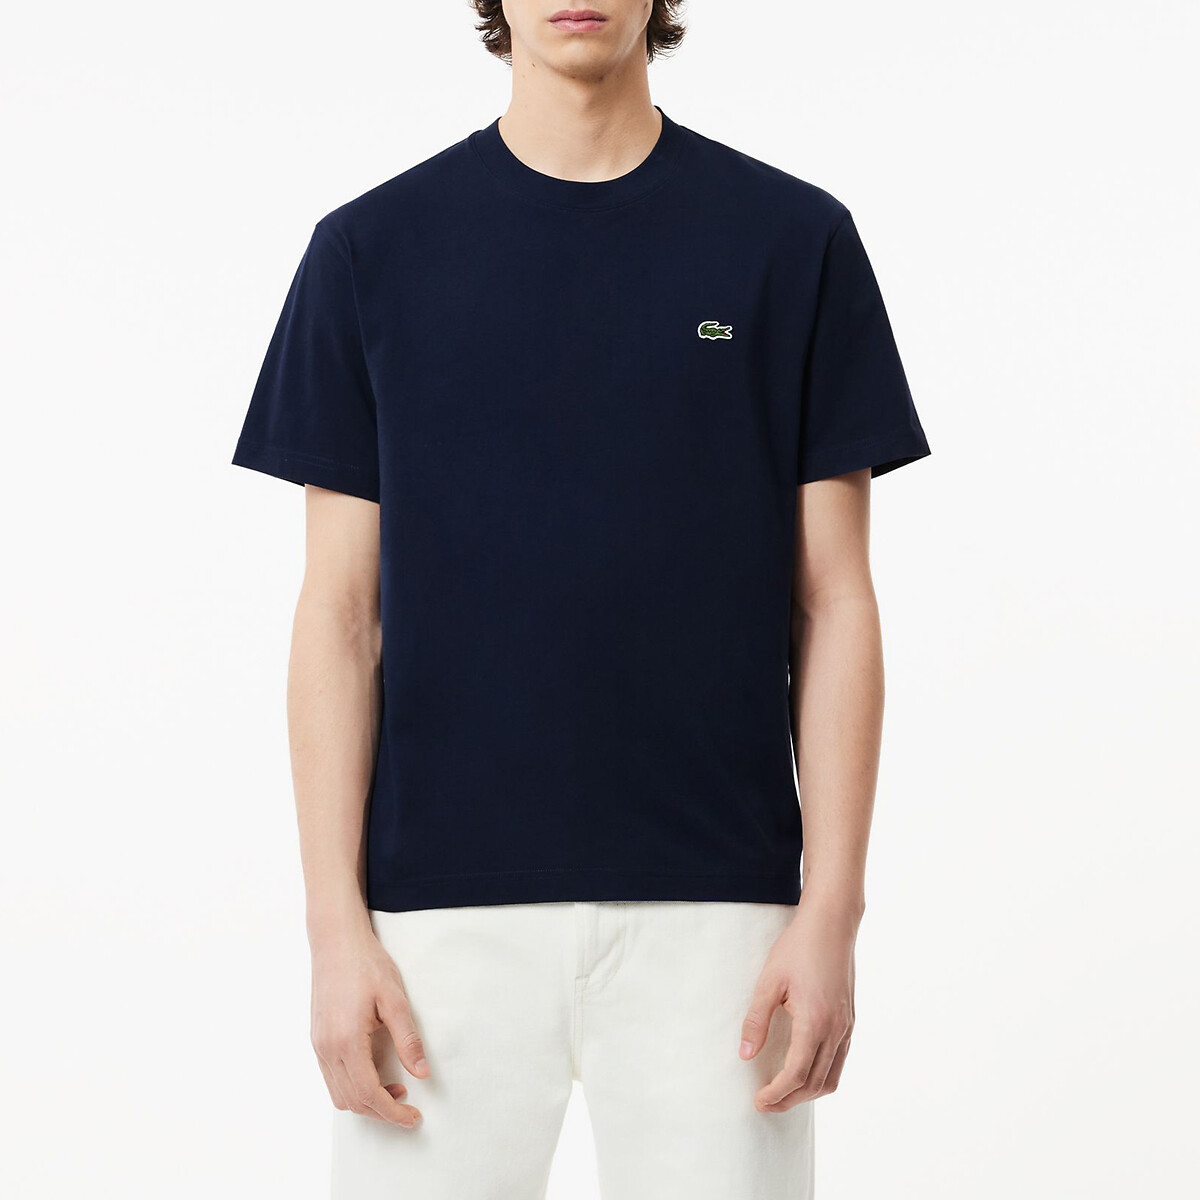 Lacoste T-Shirt Navy